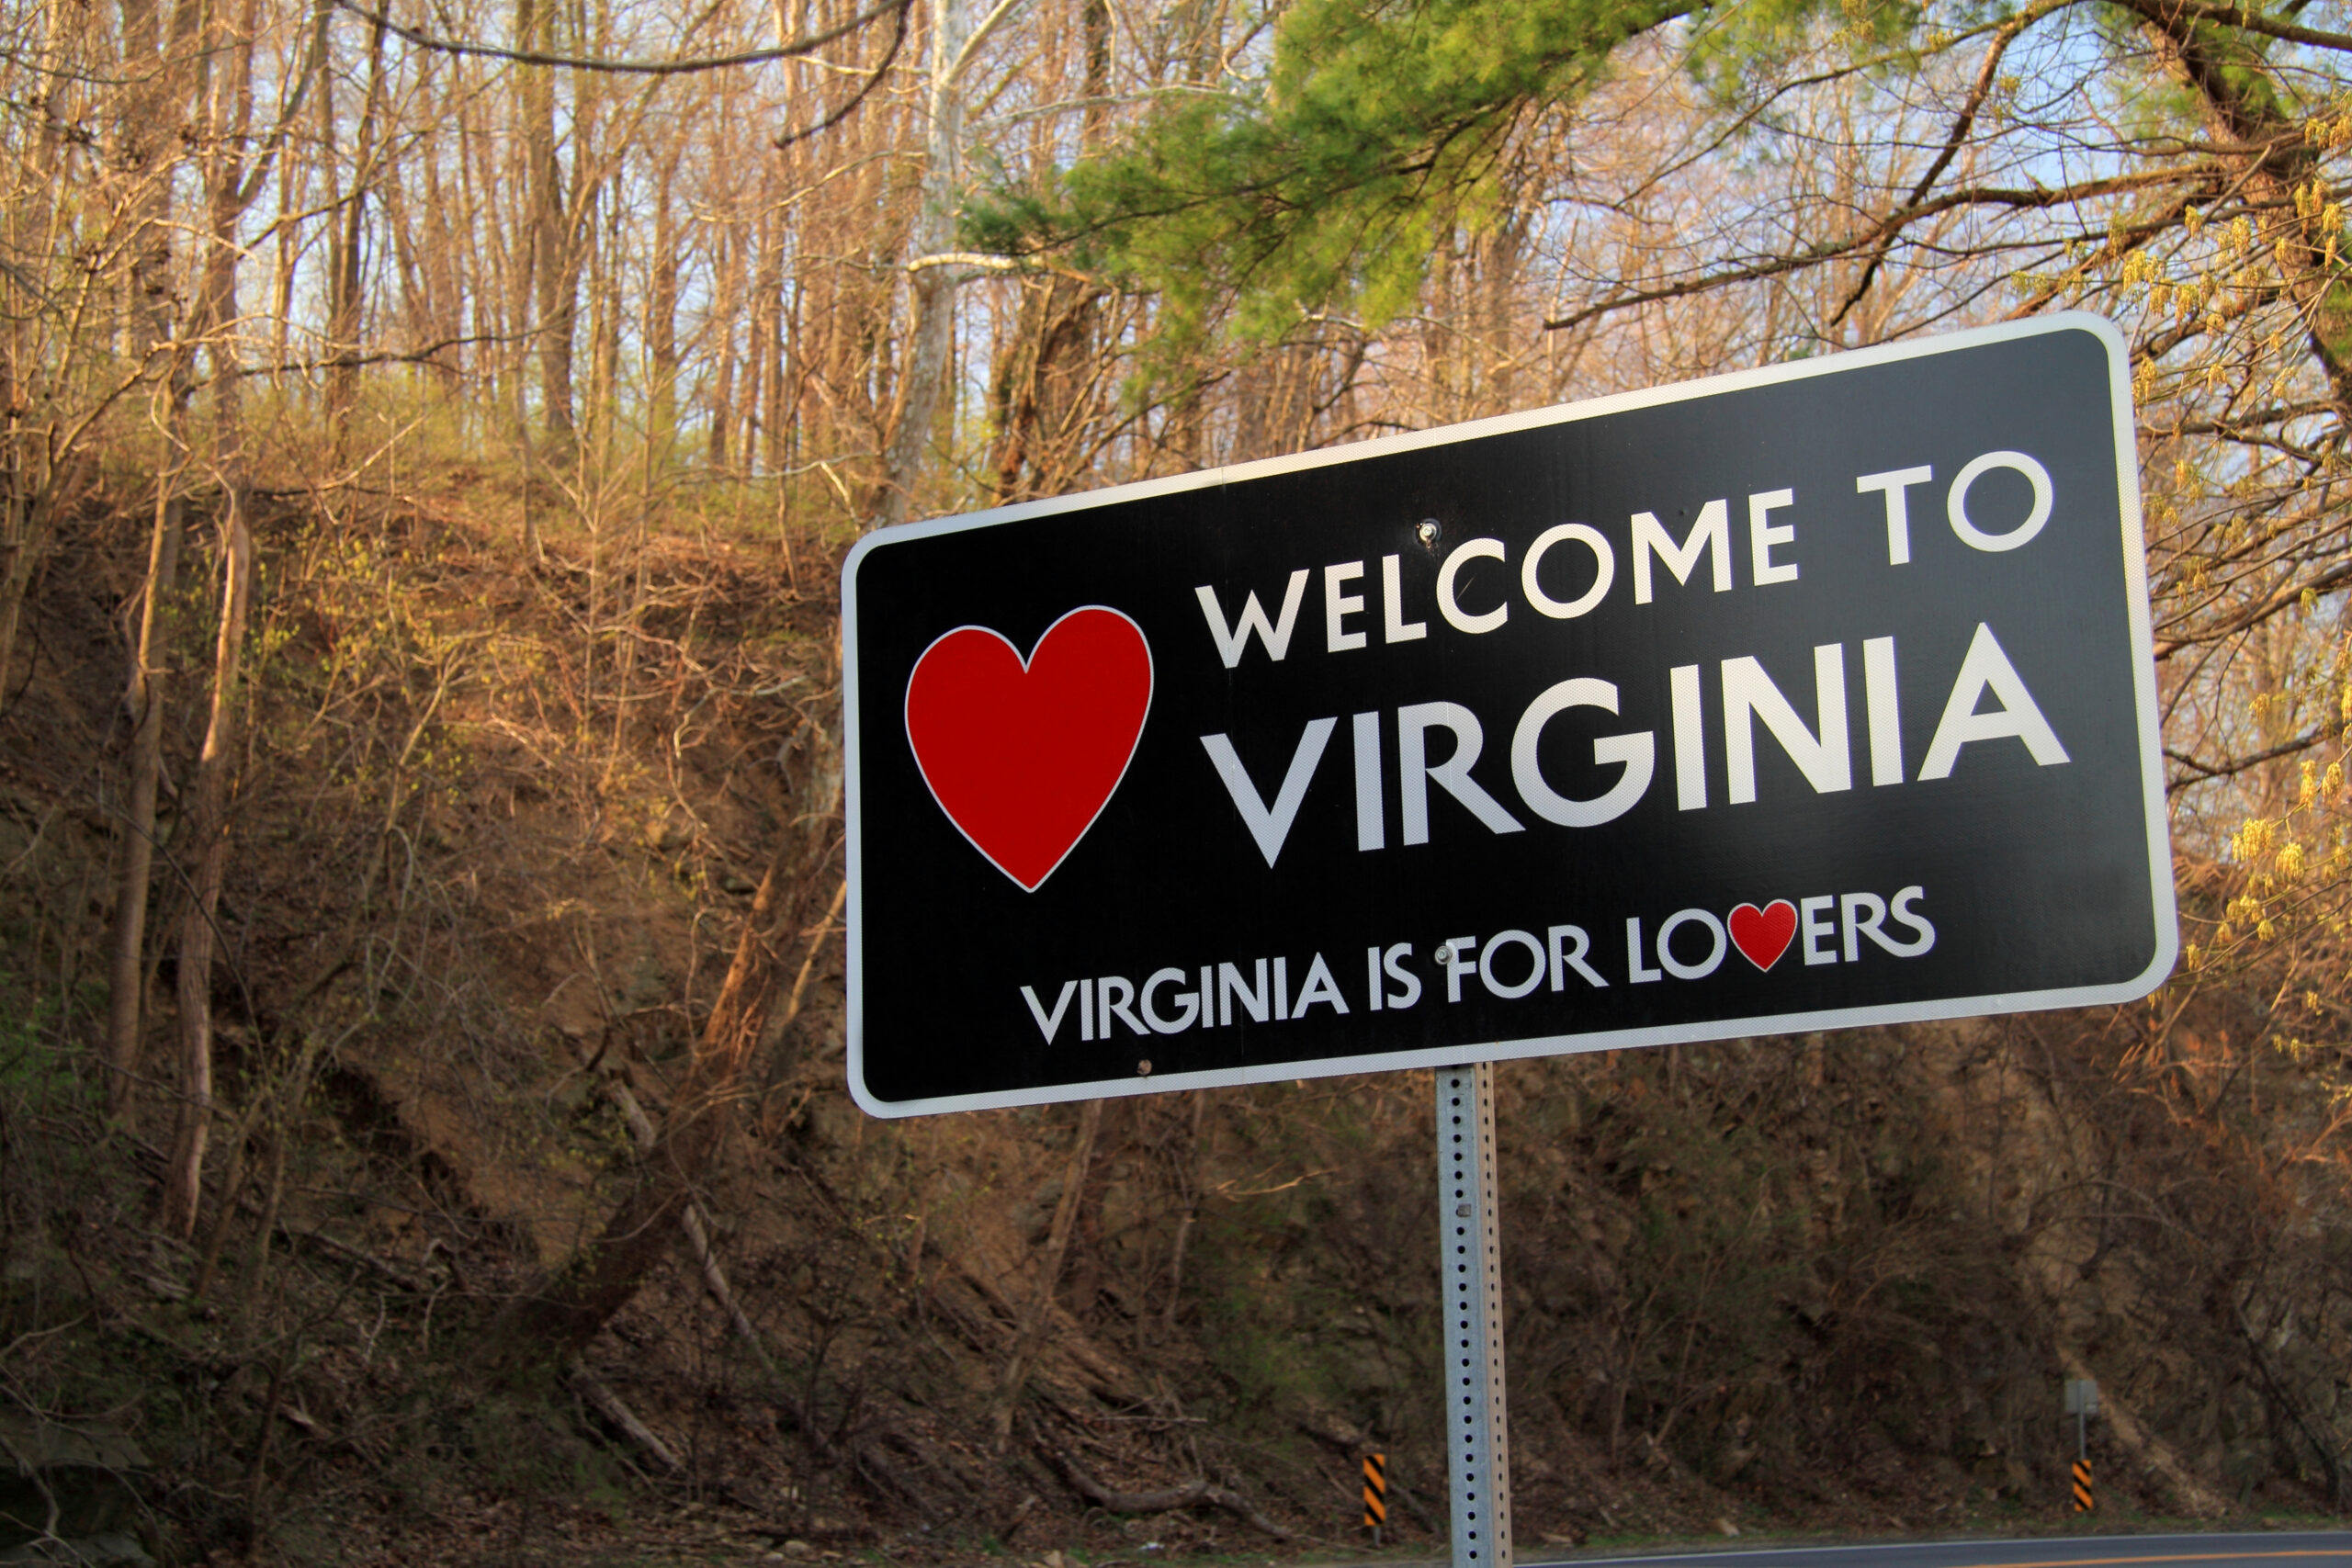 A street sign that reads "Welcome to Virginia, Virginia is for lovers"